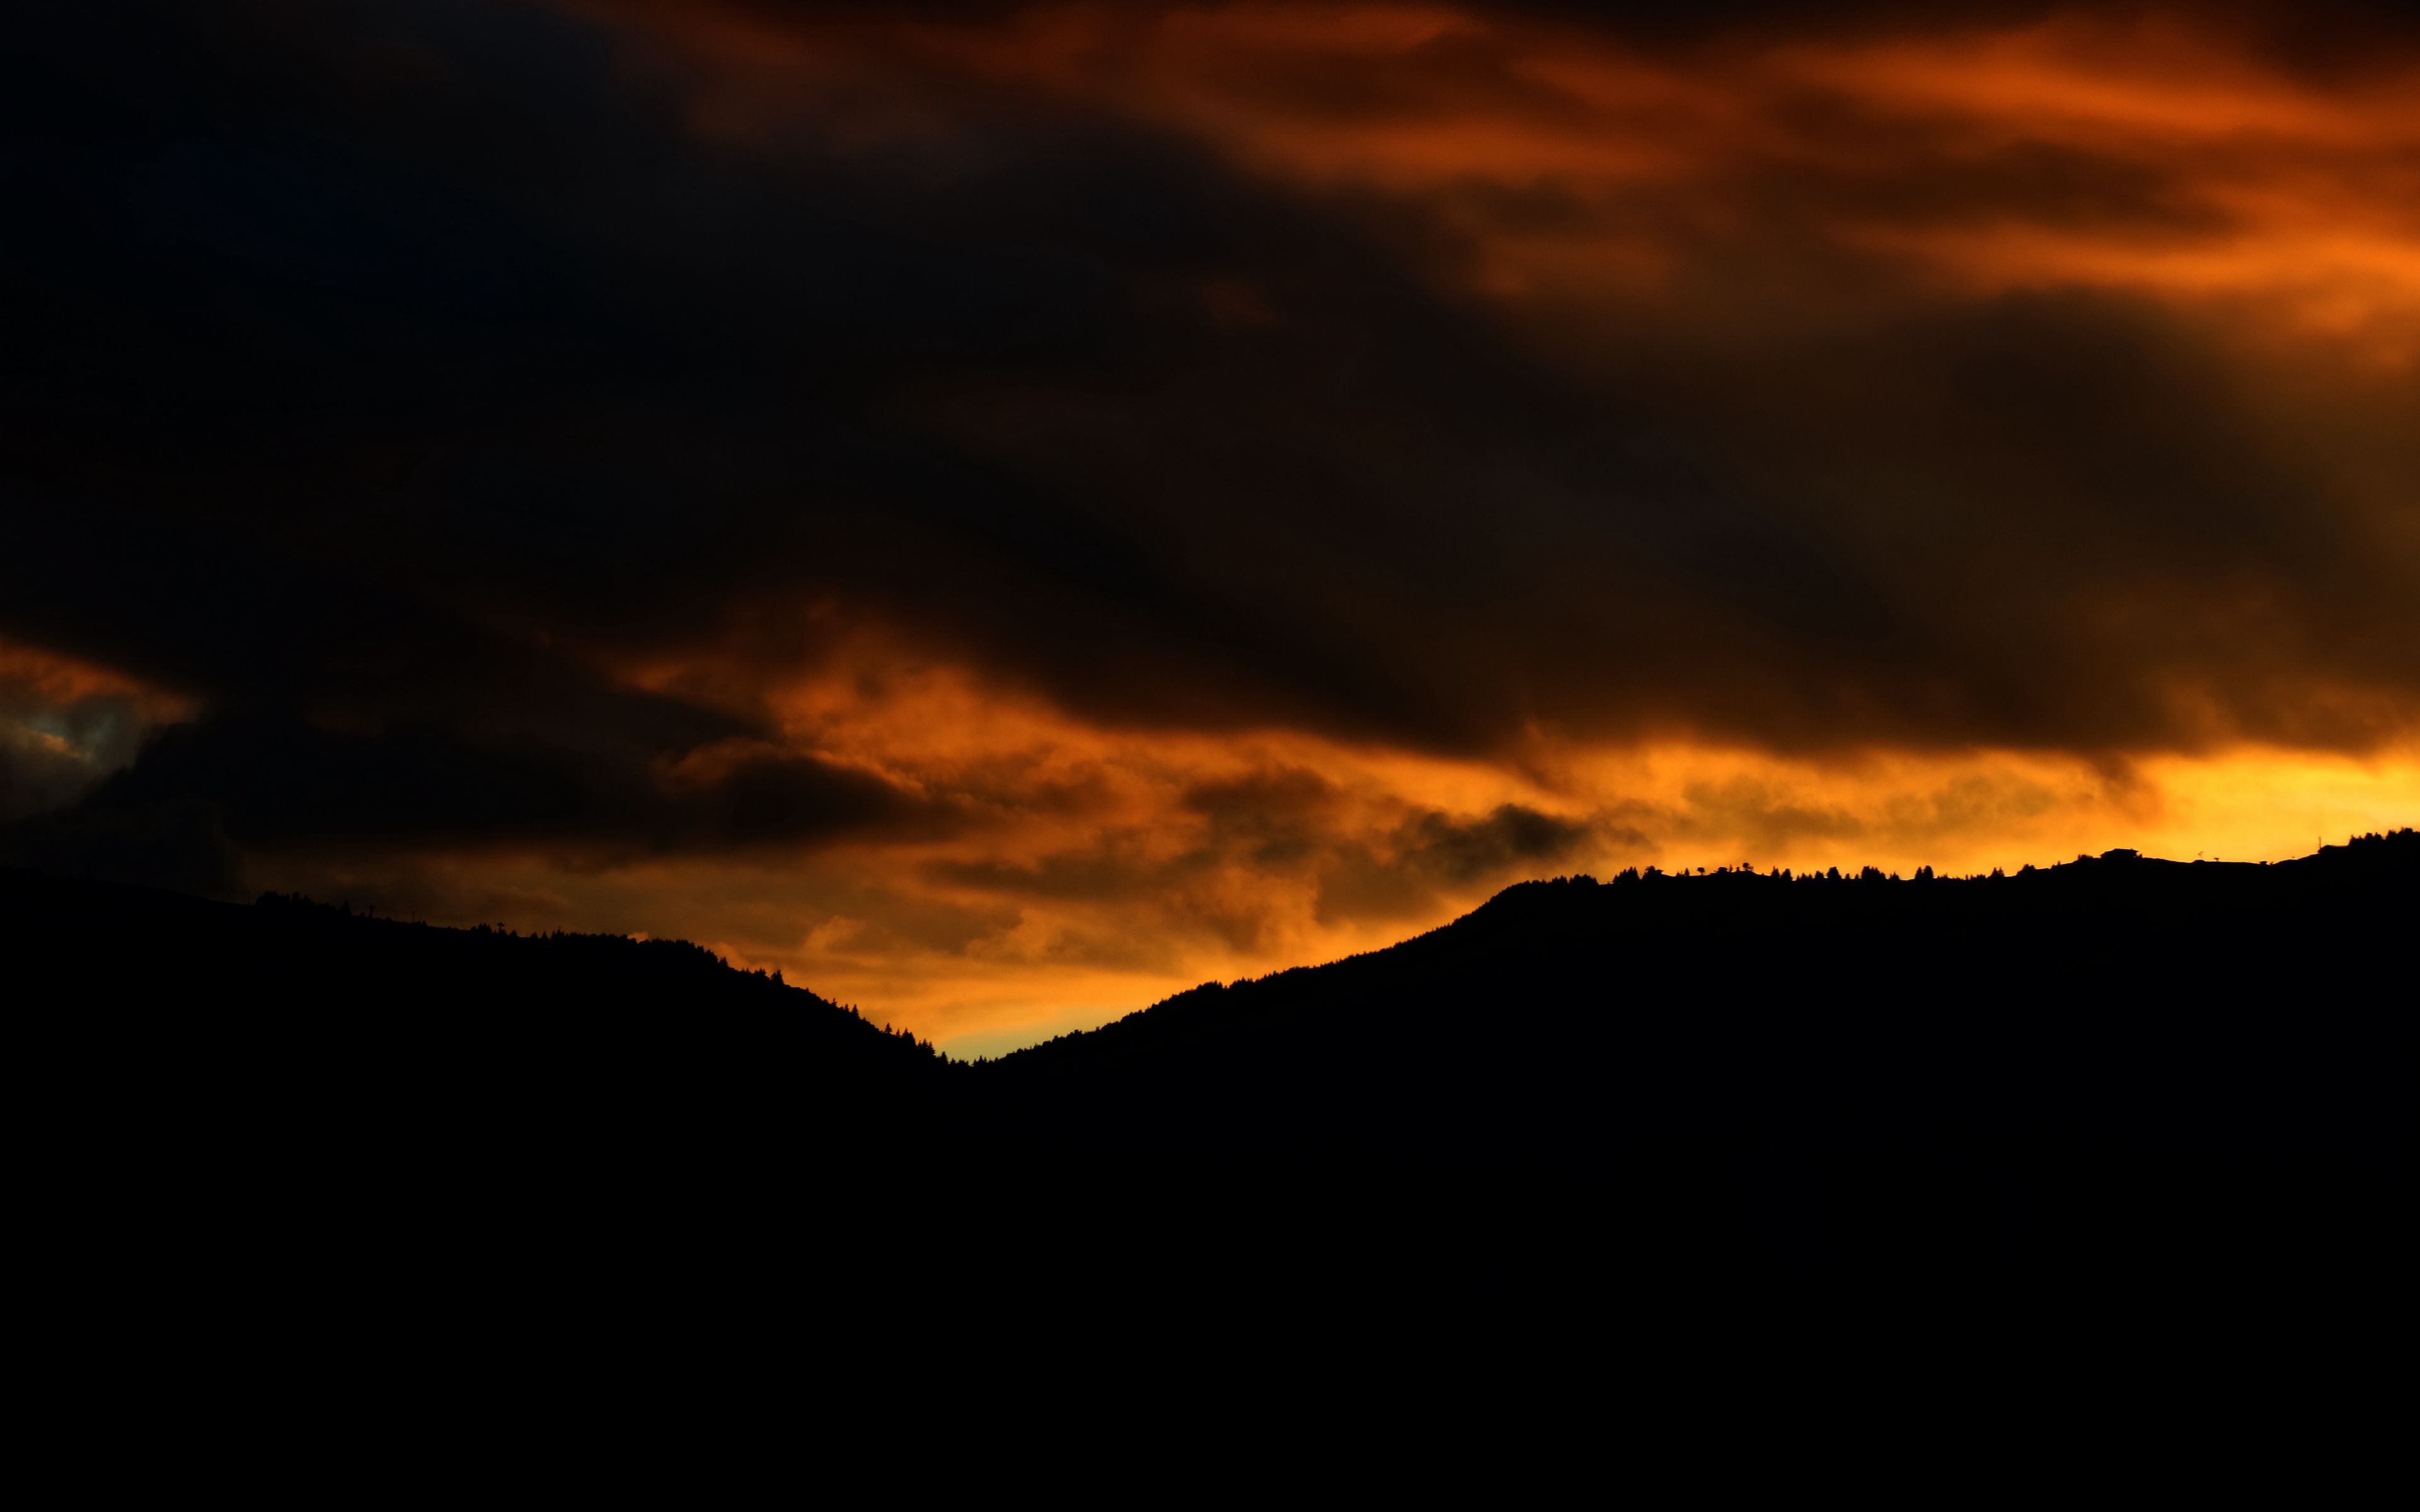 Download wallpaper 3840x2400 sunset, mountains, clouds, cloudy 4k